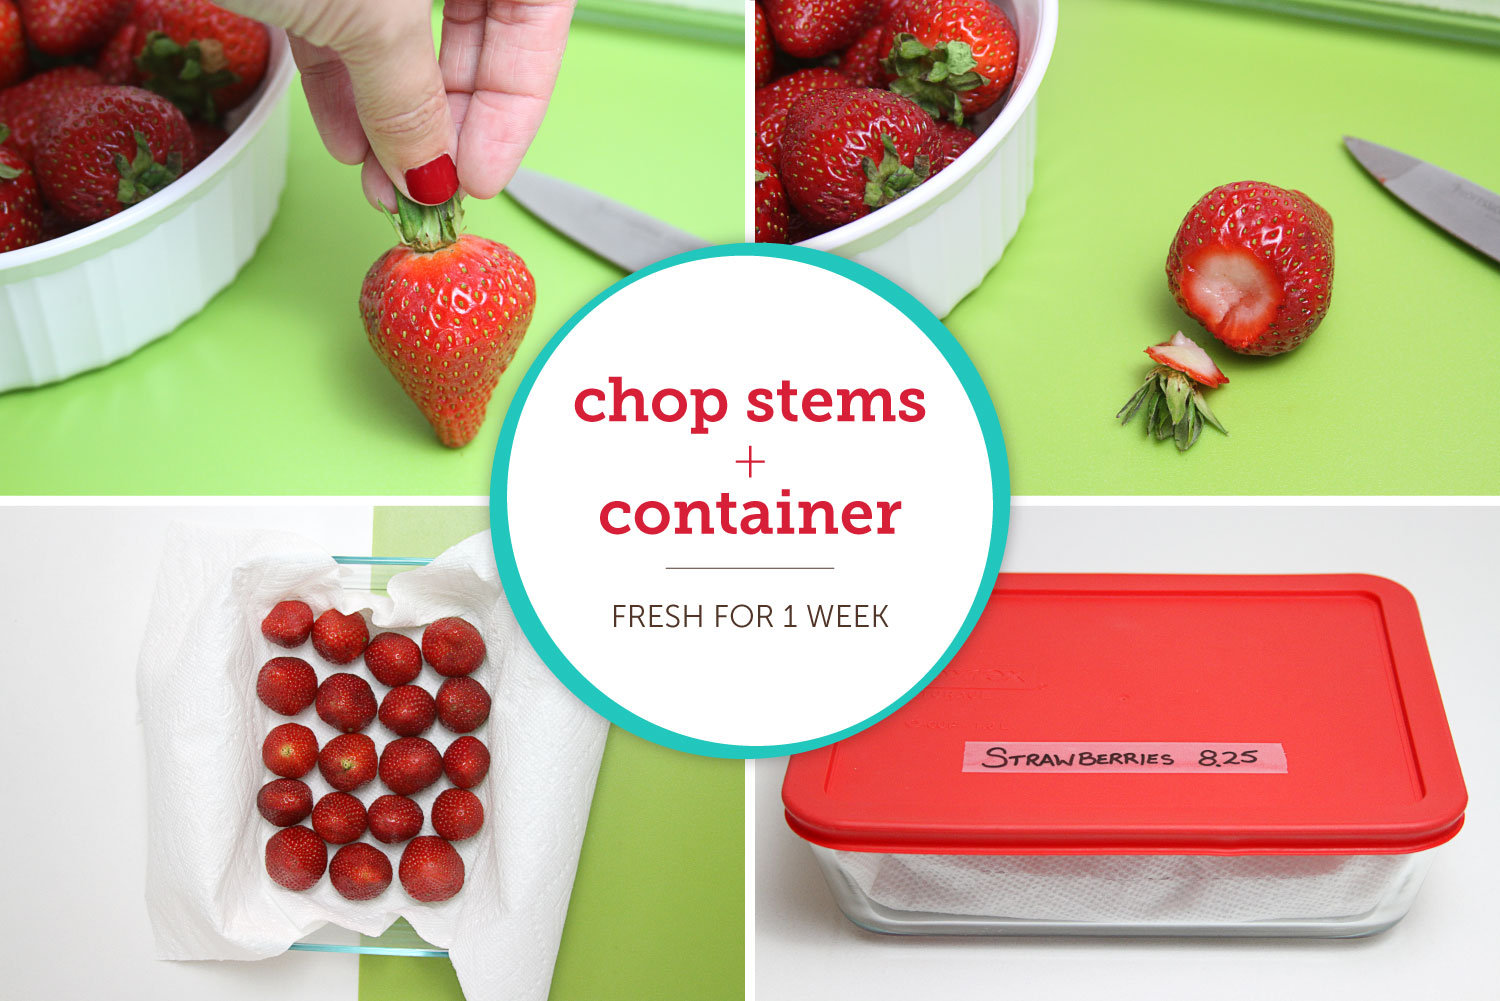 1 Don’t wash strawberries before storing